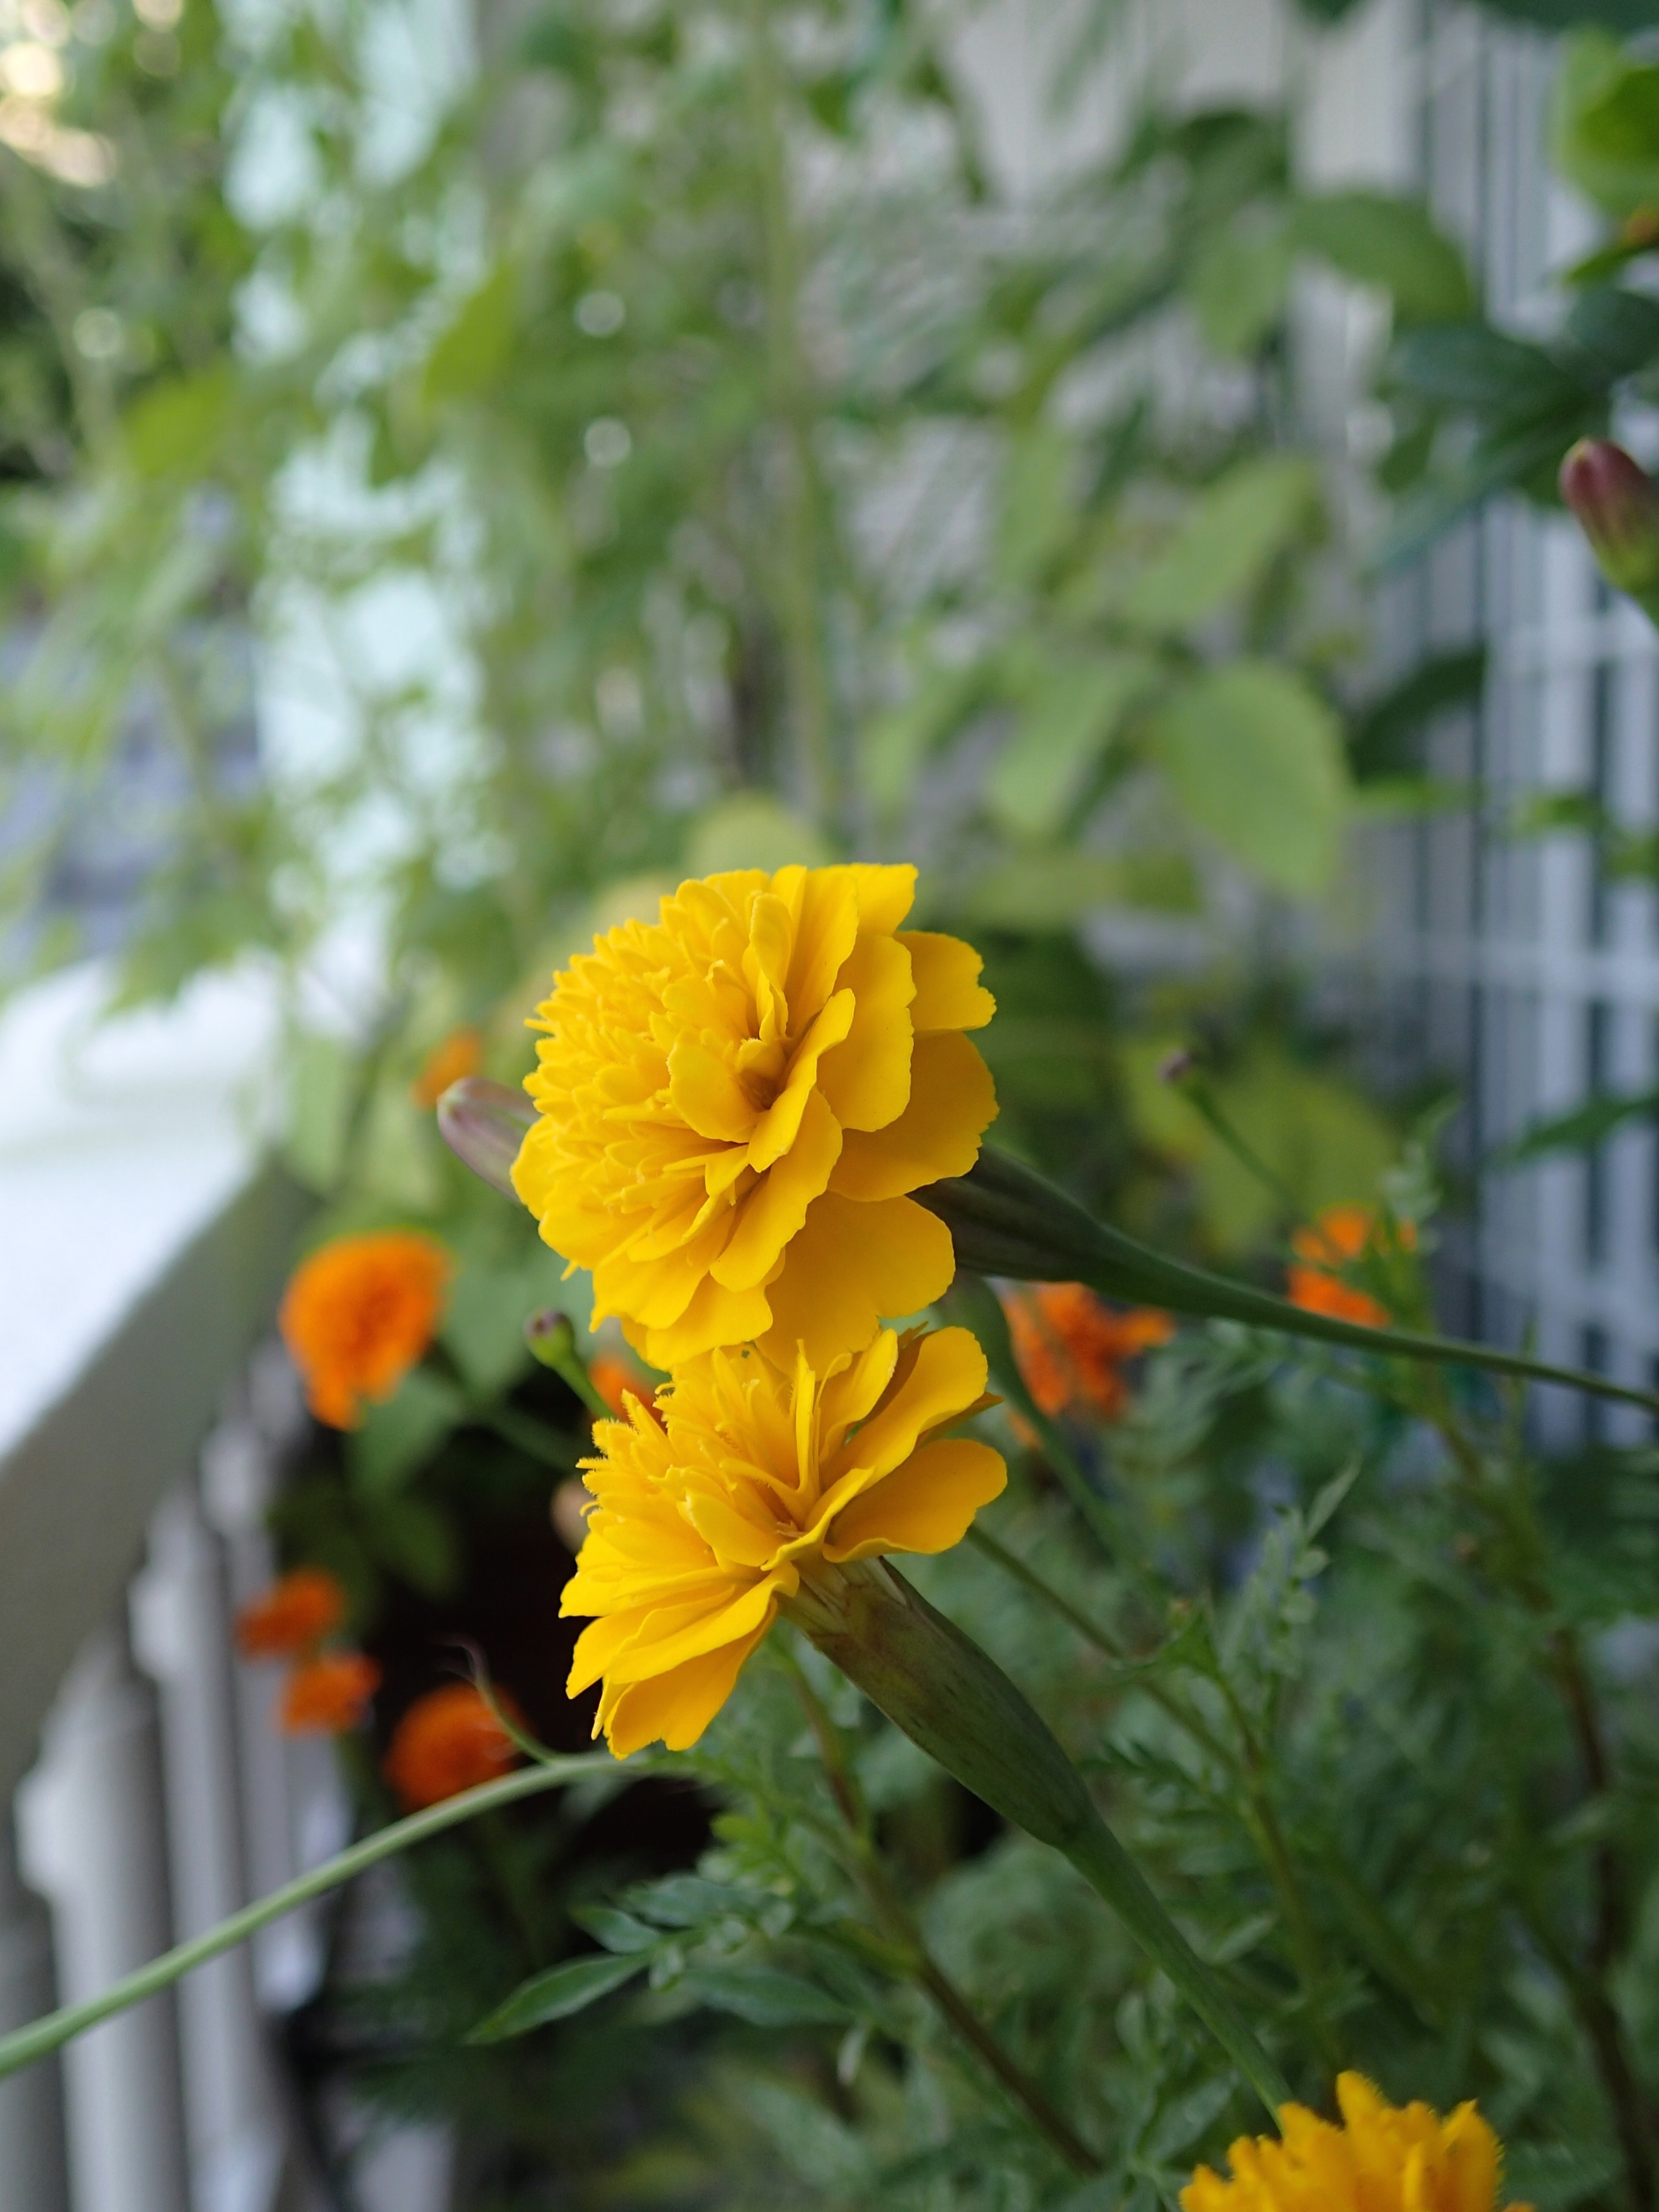 Marigolds planted next to the tomatoes to attract bees and butterflies